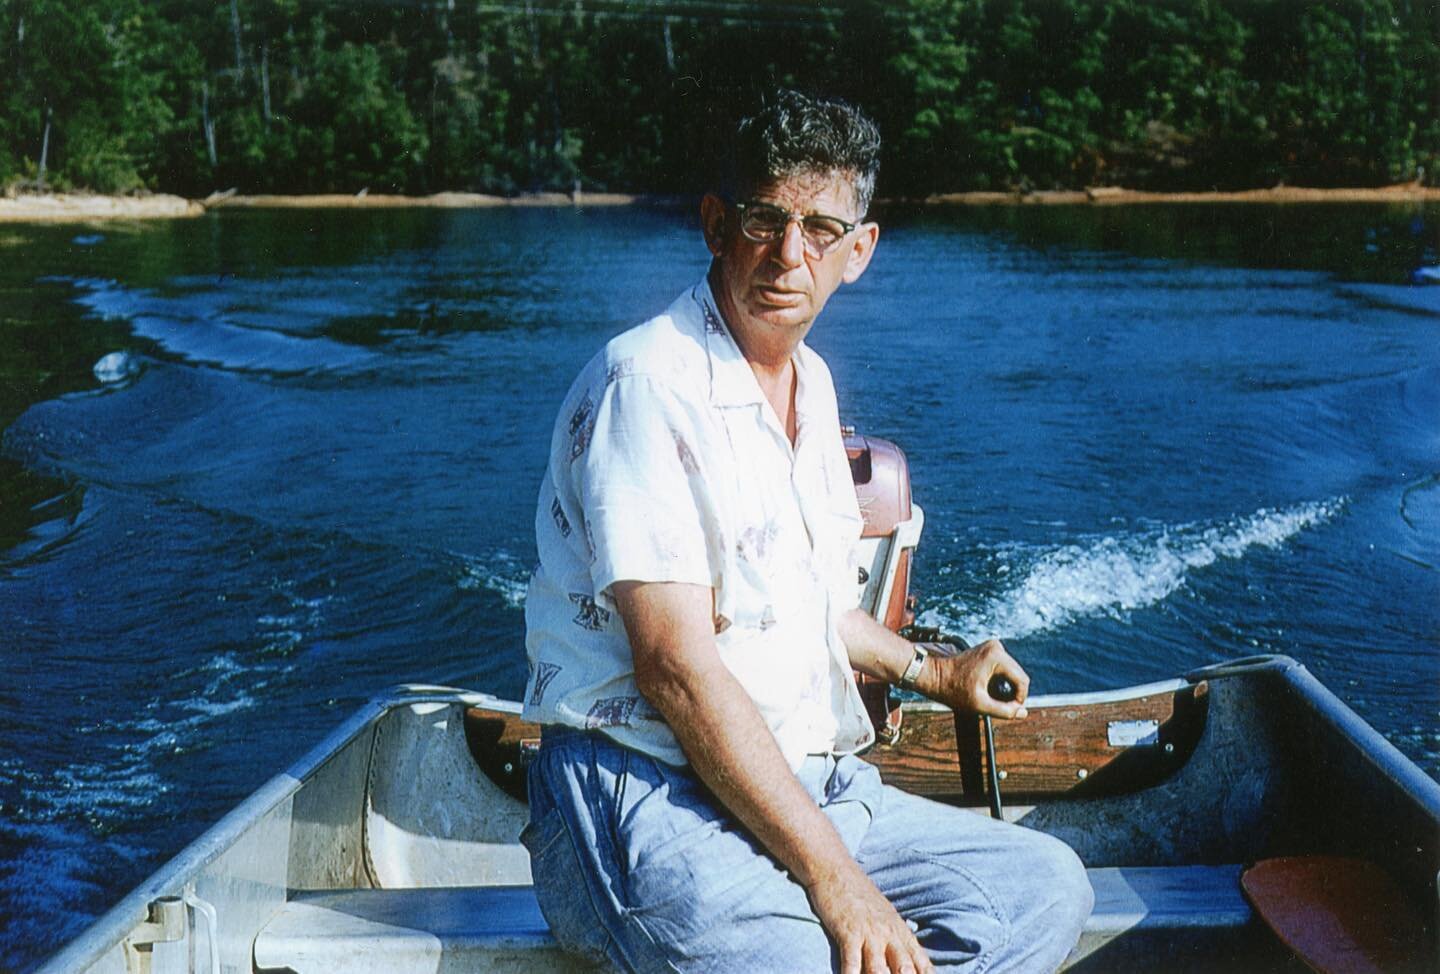 We haven&rsquo;t posted a history shot in a while... here&rsquo;s Christie&rsquo;s great-grandad, Wilbur Archer, on Lake Burton in the mid/late 60s. A very nice shot by Christie&rsquo;s grandfather, Frank Bazemore.